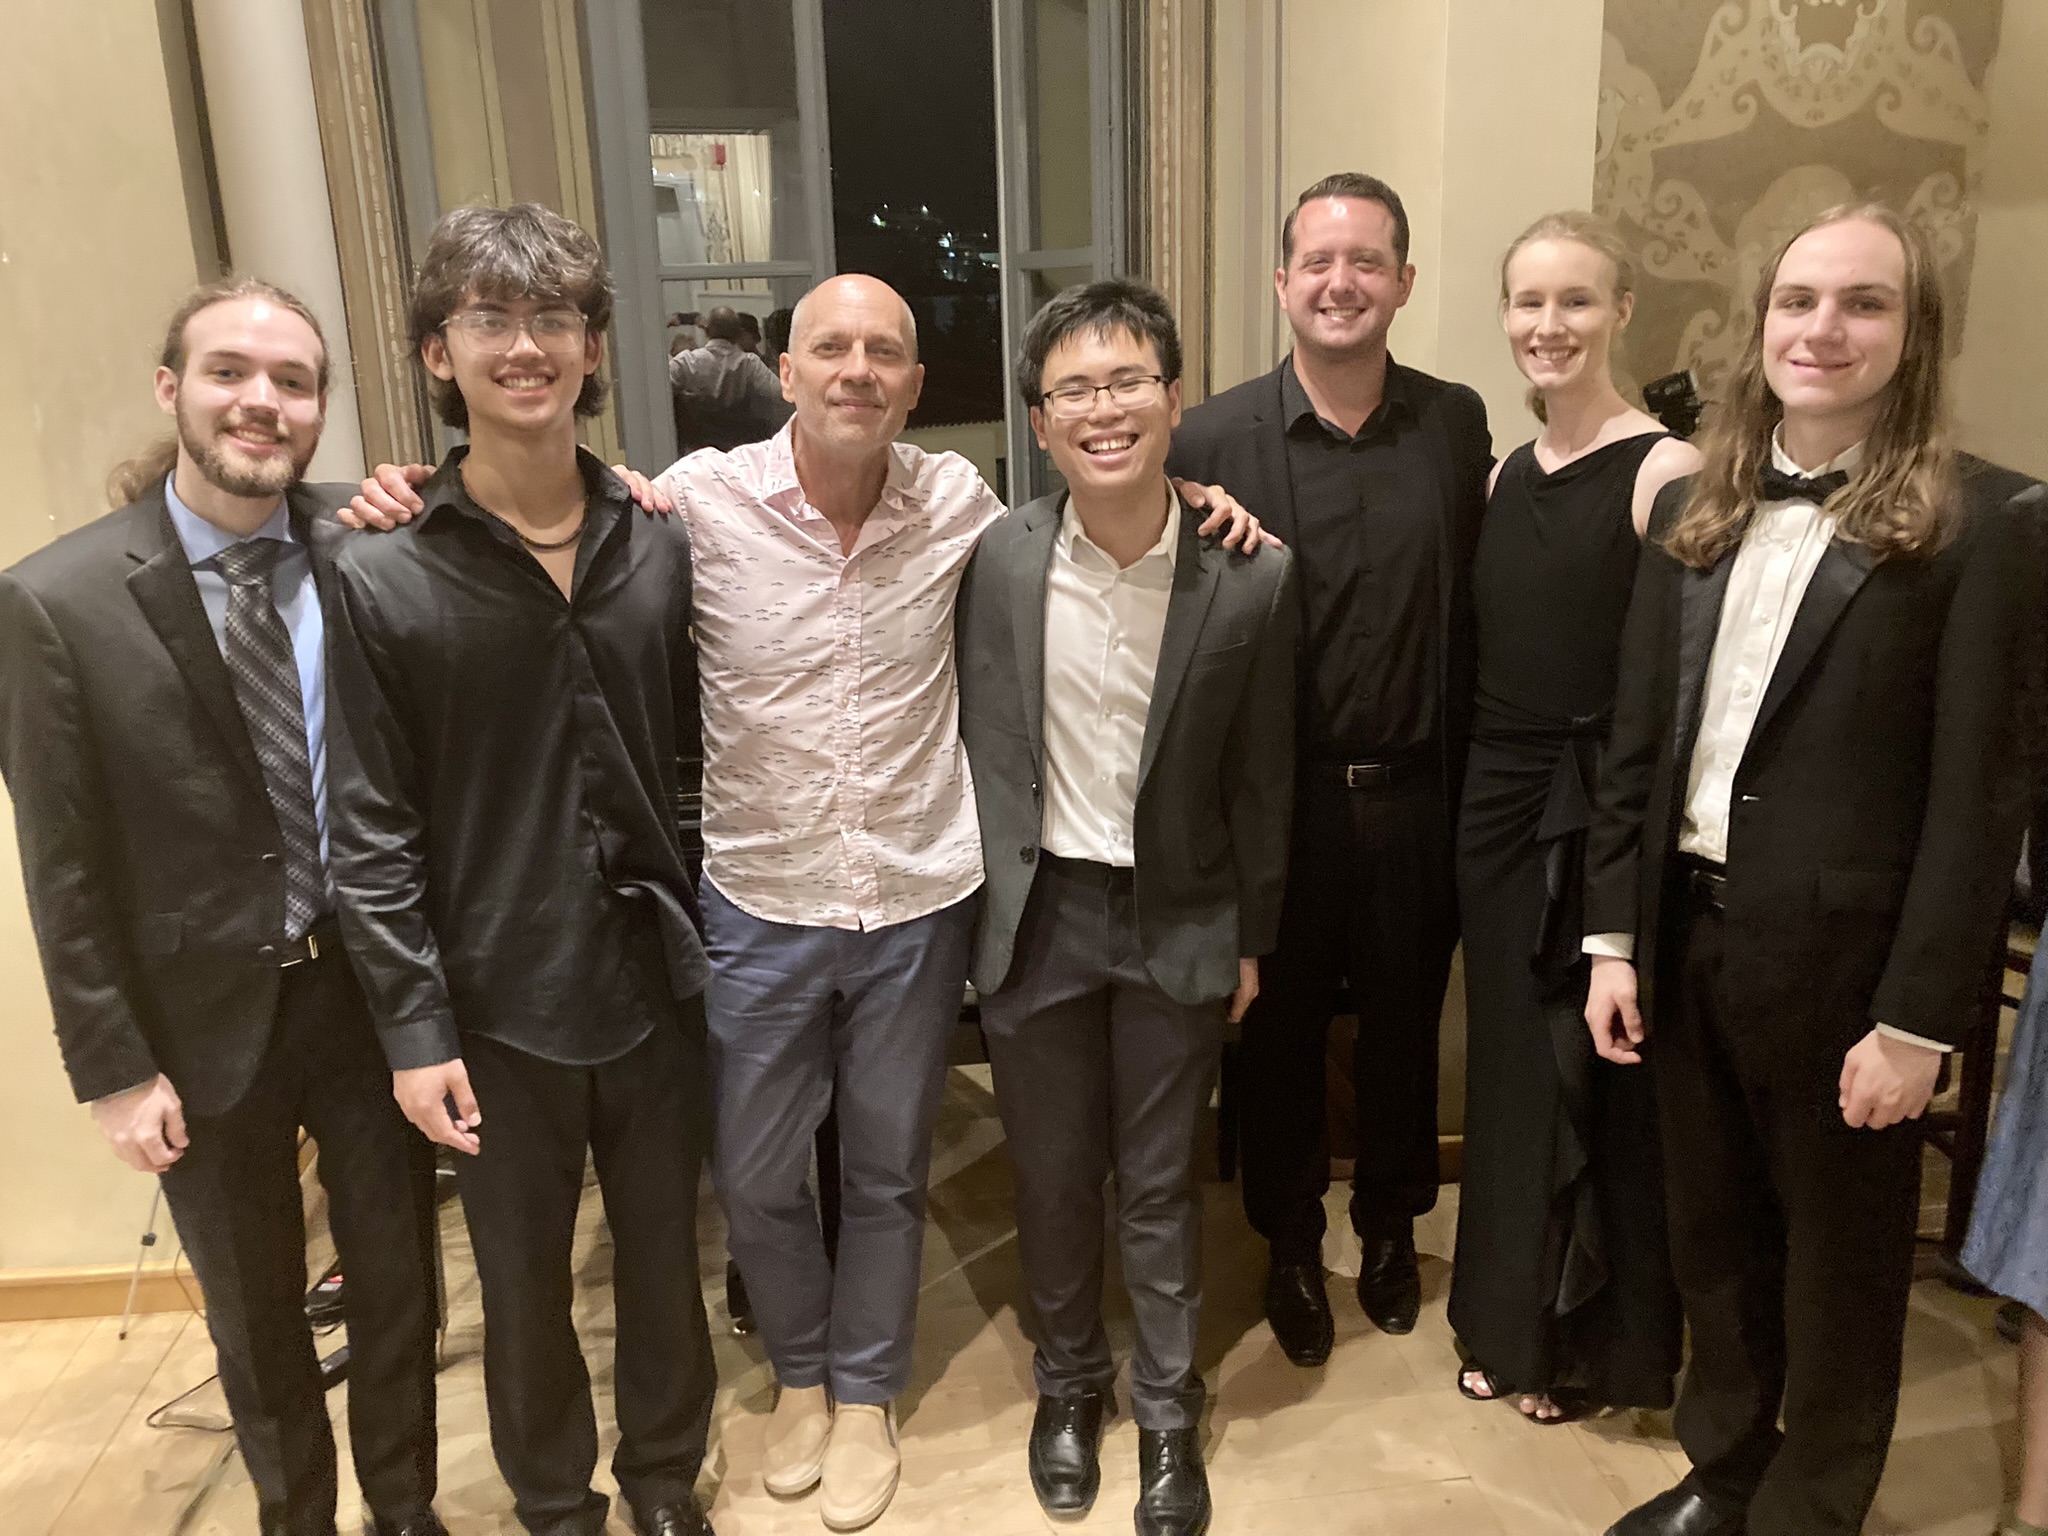 Left to right: Nathaniel Brown, Zachary Jacobsen, Paul Barnes, Khang Nguyen, Andrew Daugherty, Rebekah Stiles and Ben DeLong at a Summer Piano Institute concert in Greece. Courtesy photo.